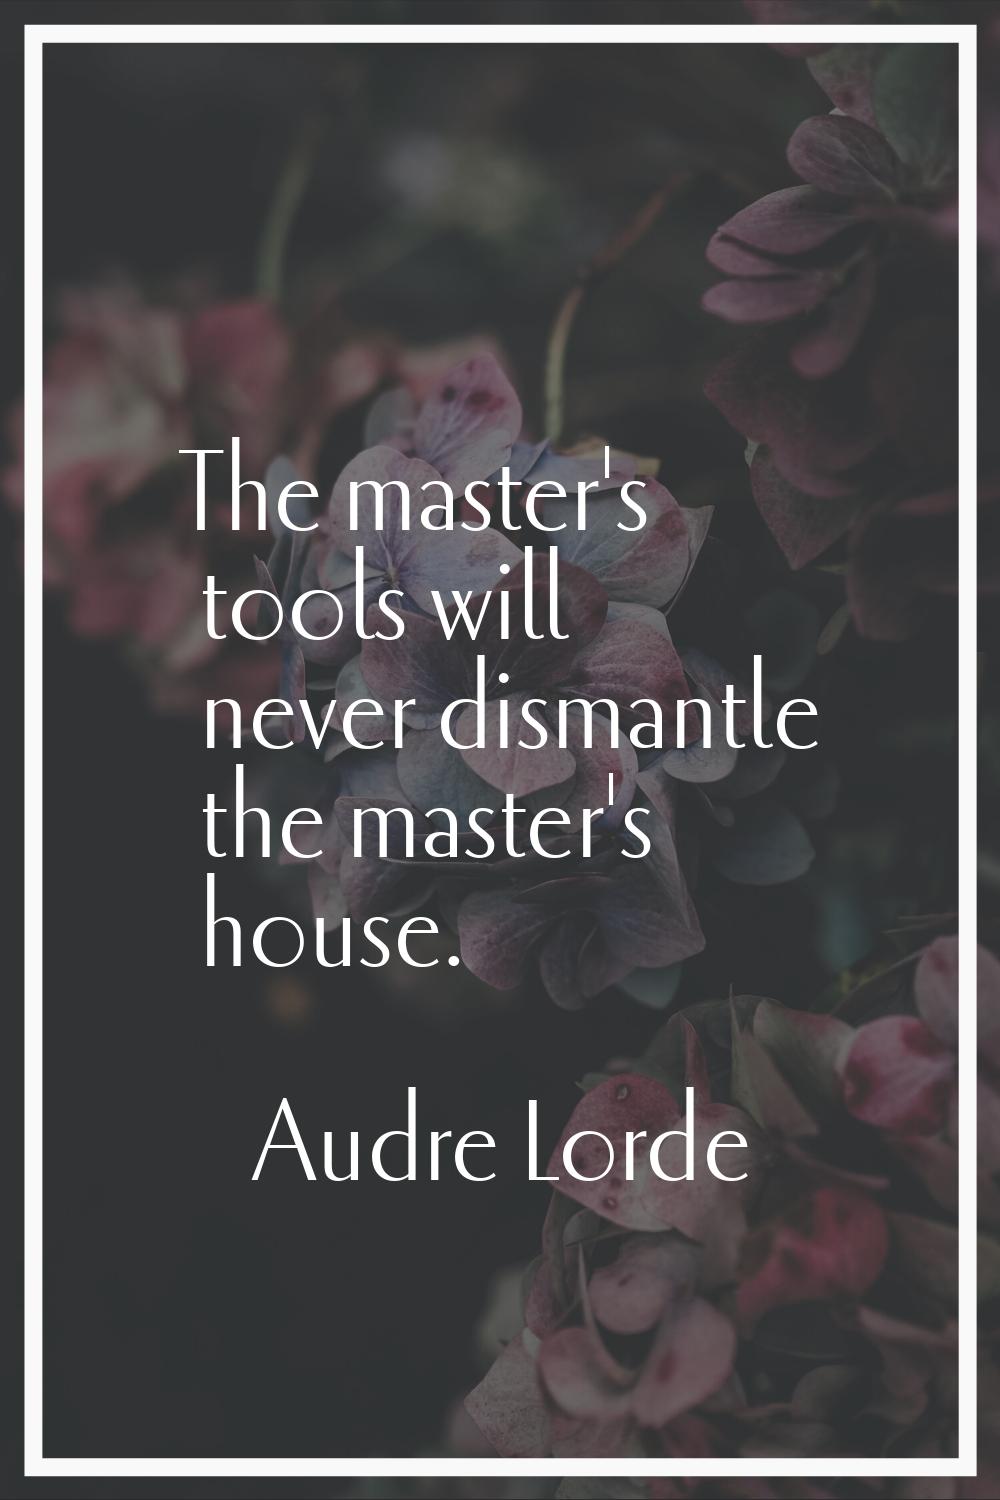 The master's tools will never dismantle the master's house.